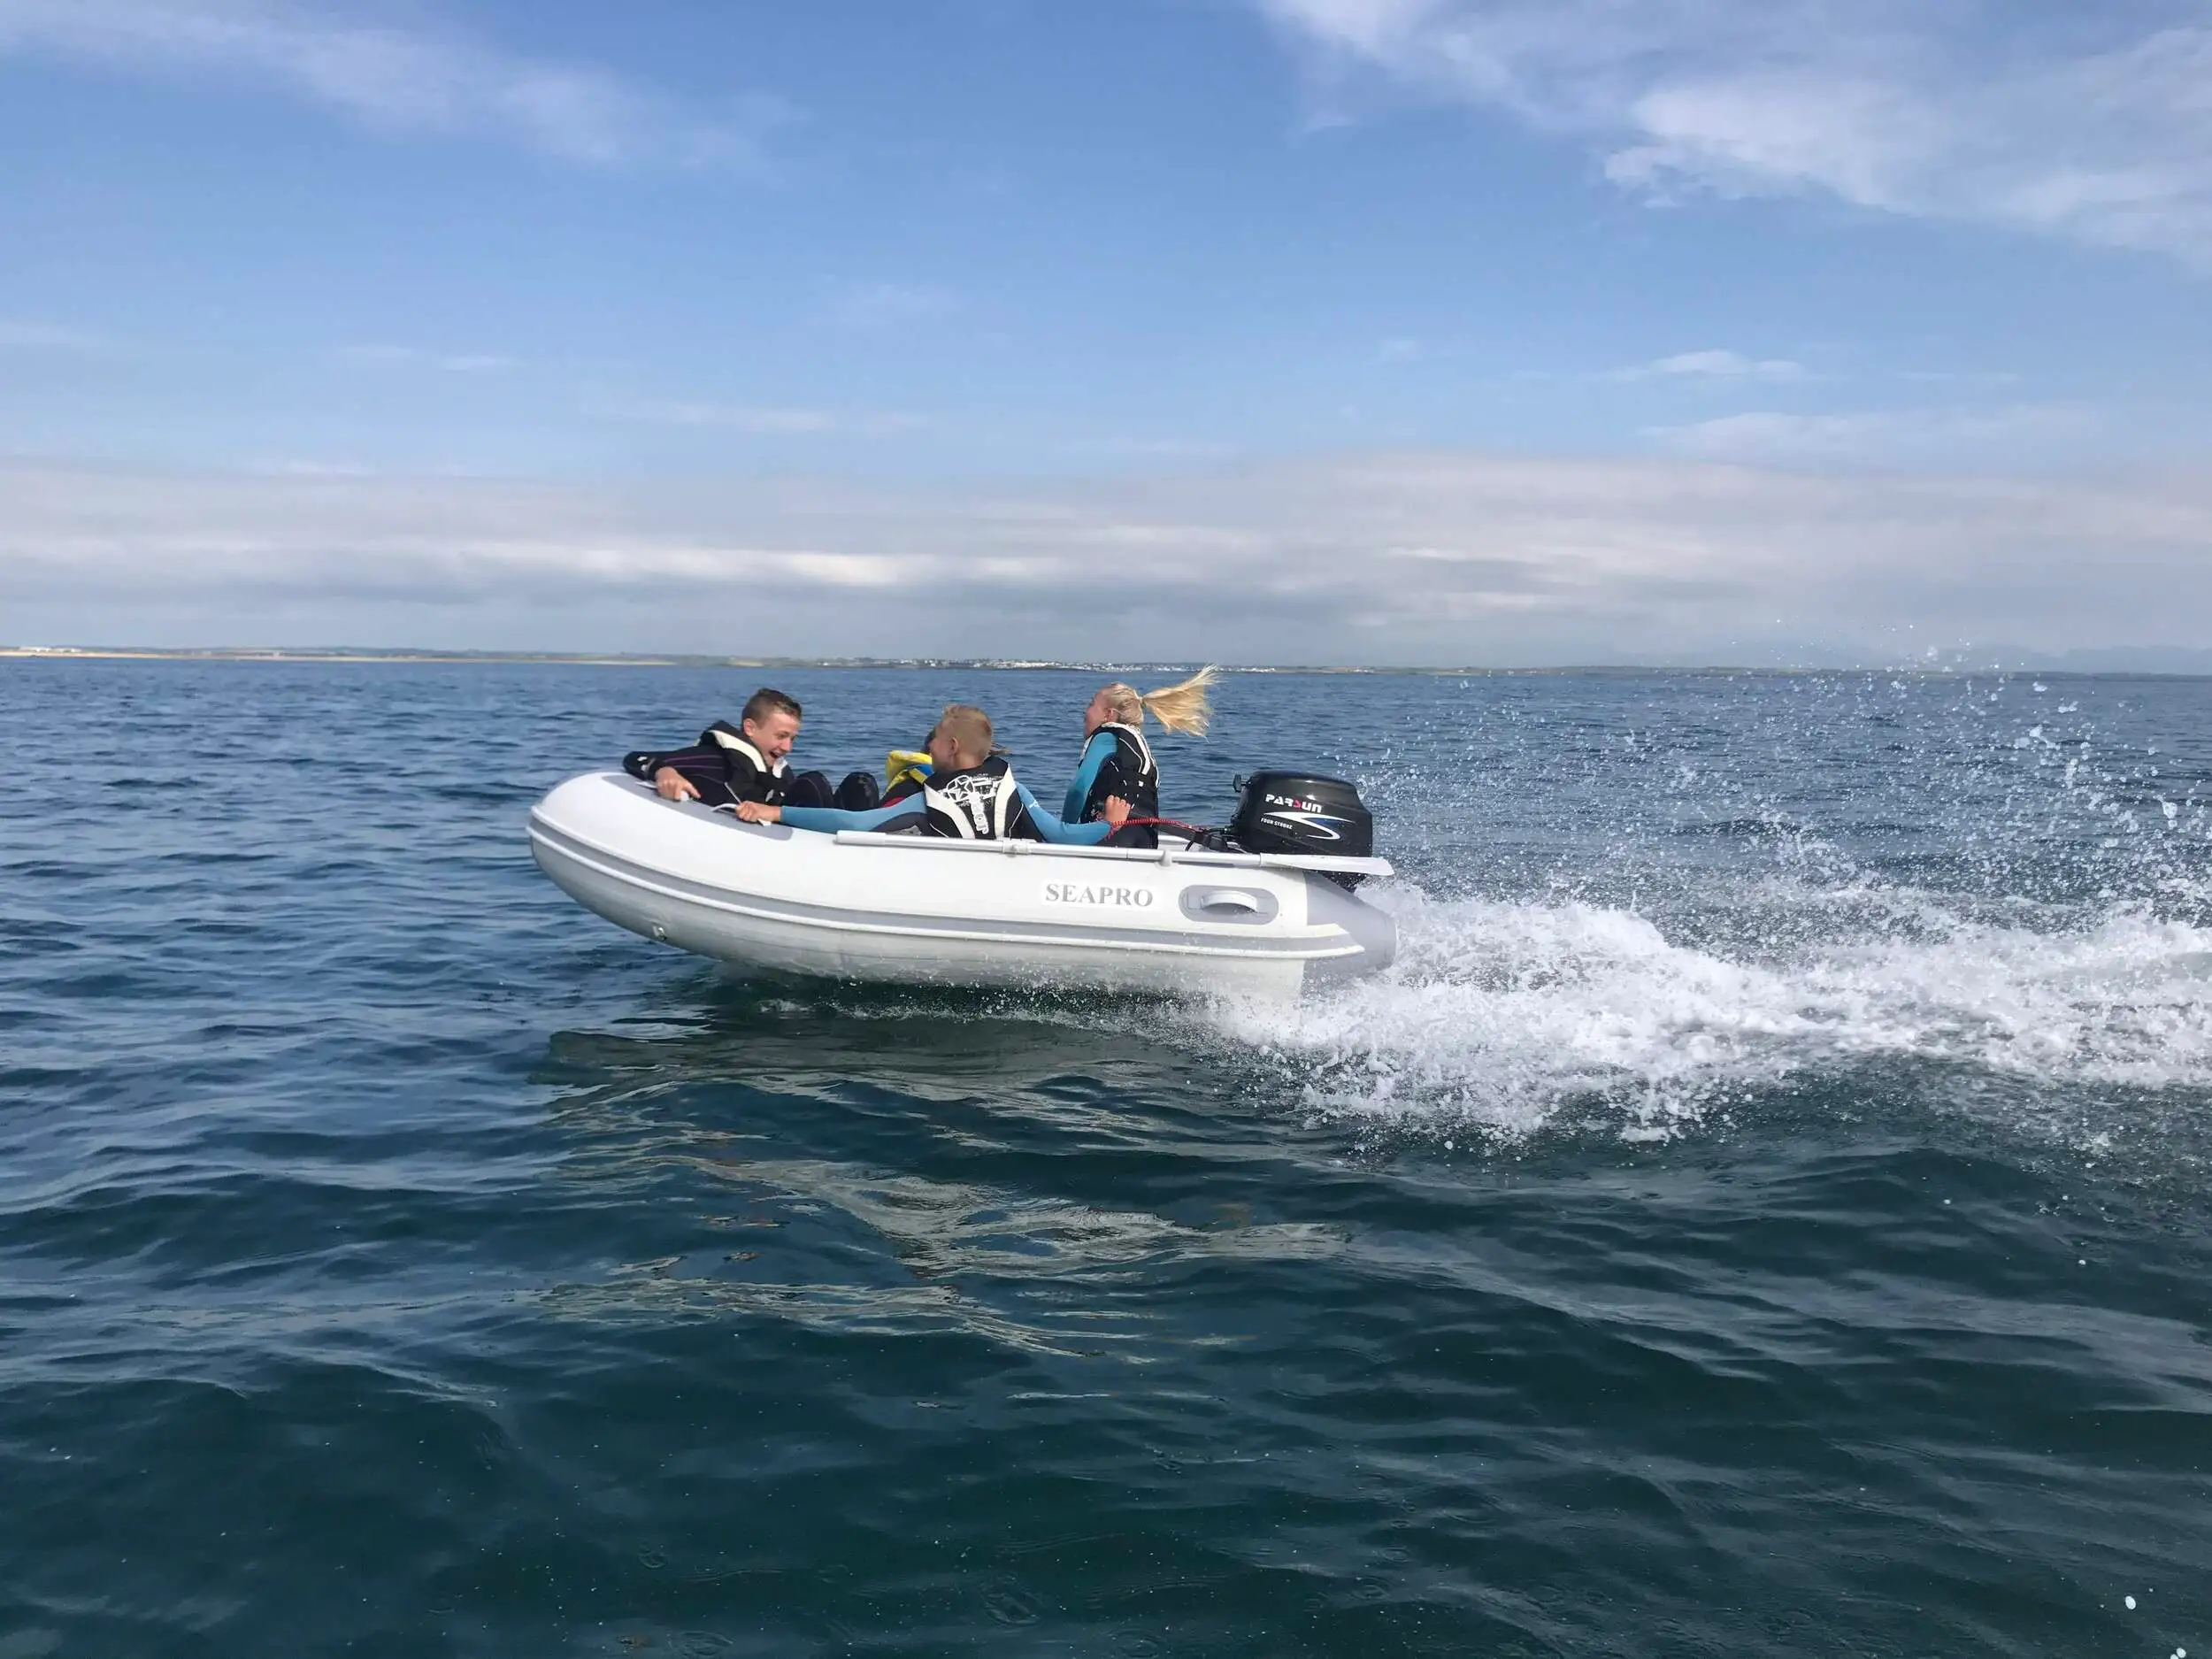 Seapro inflatable boat